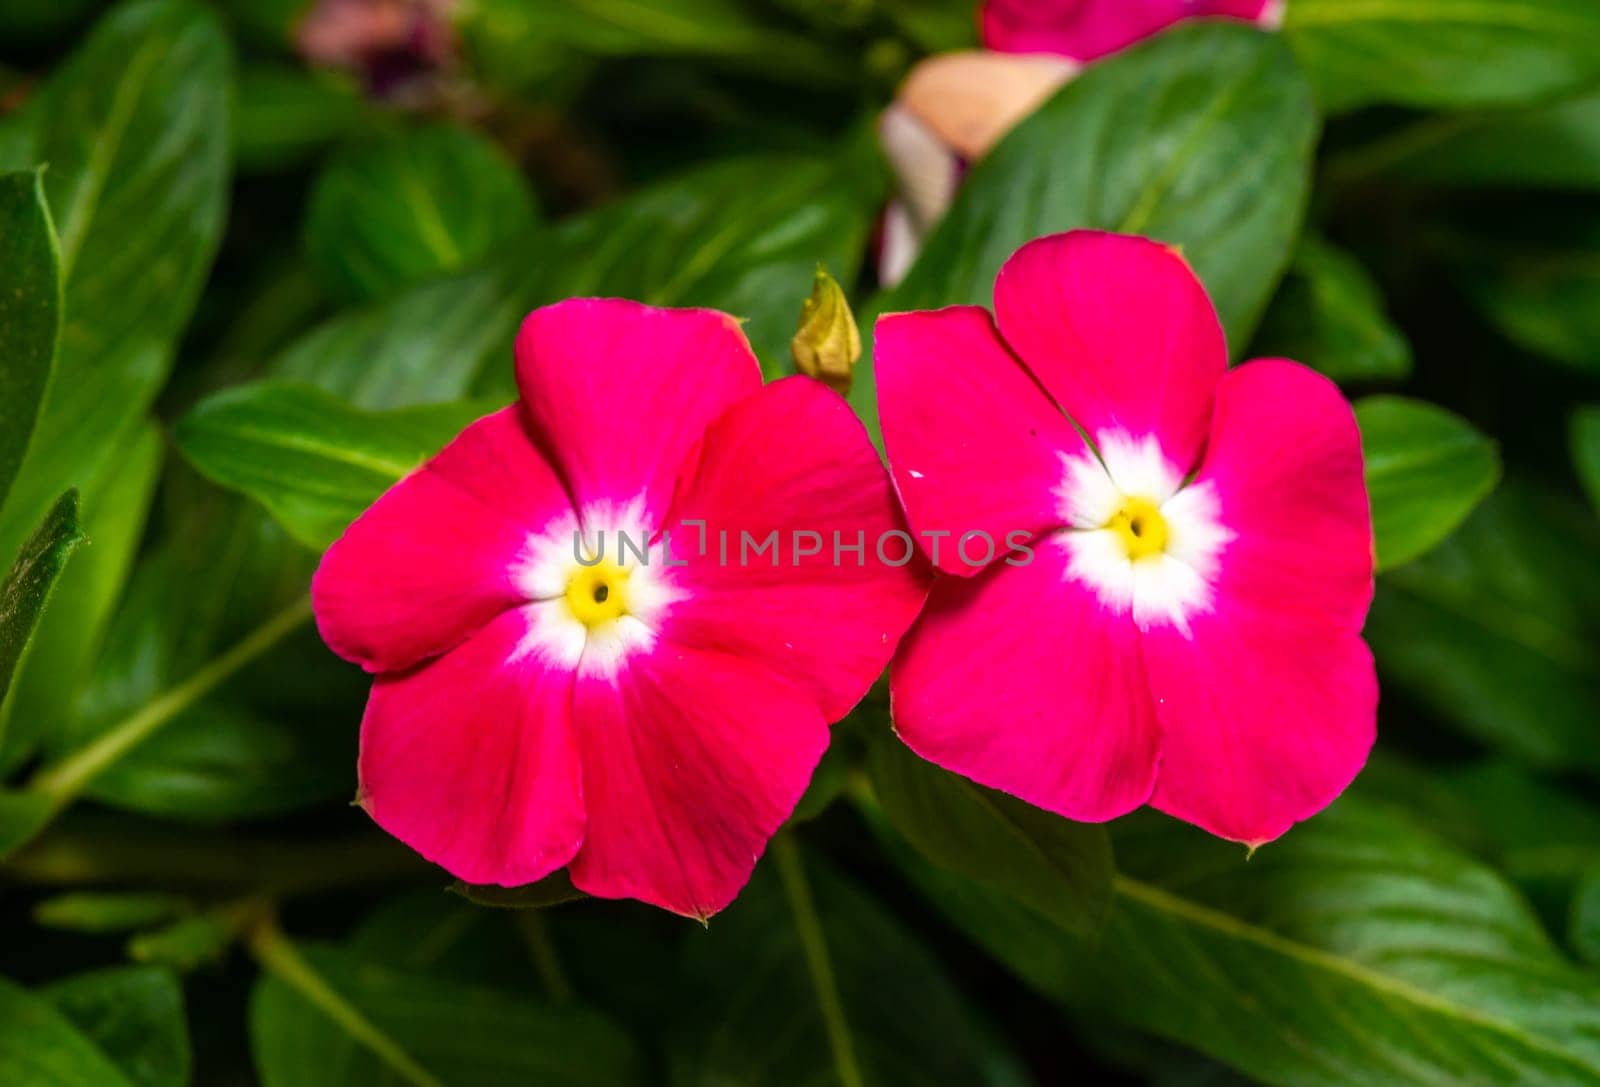 Catharanthus roseus - close-up of flowers of a plant with red petals